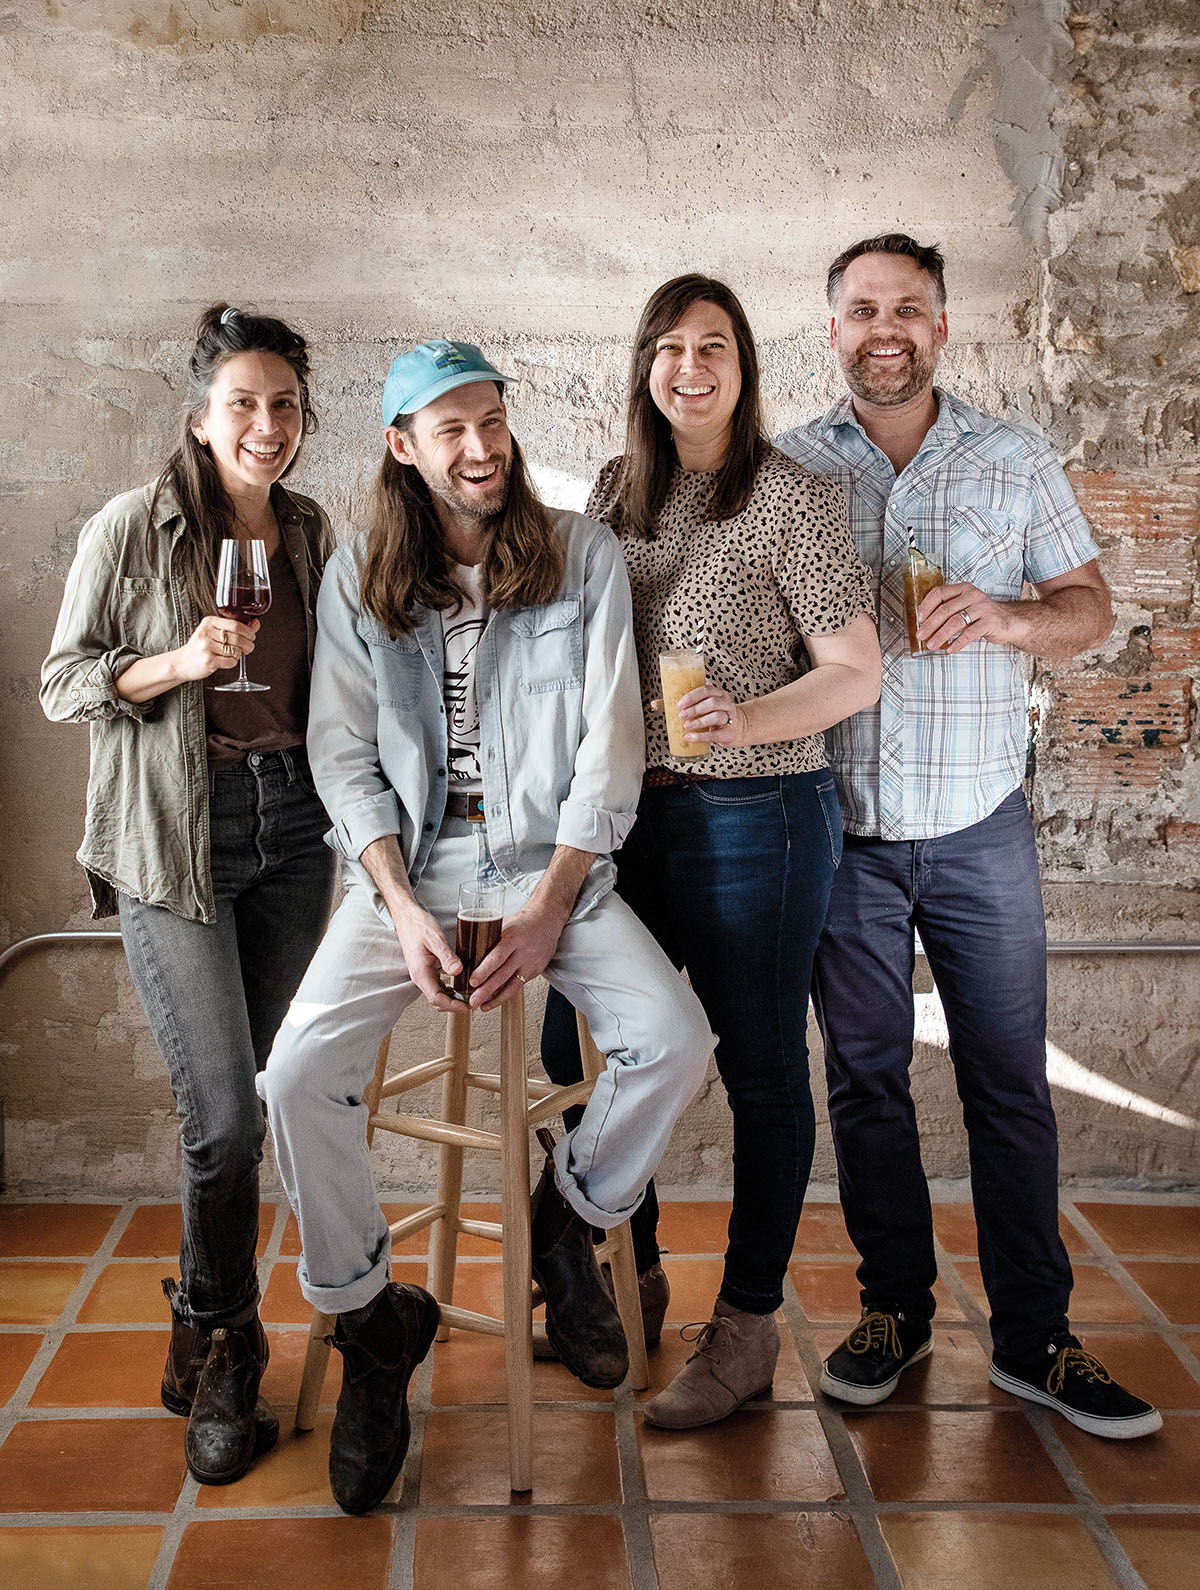 A group of people stand smiling and holding drinks in front of an exposed stone wall